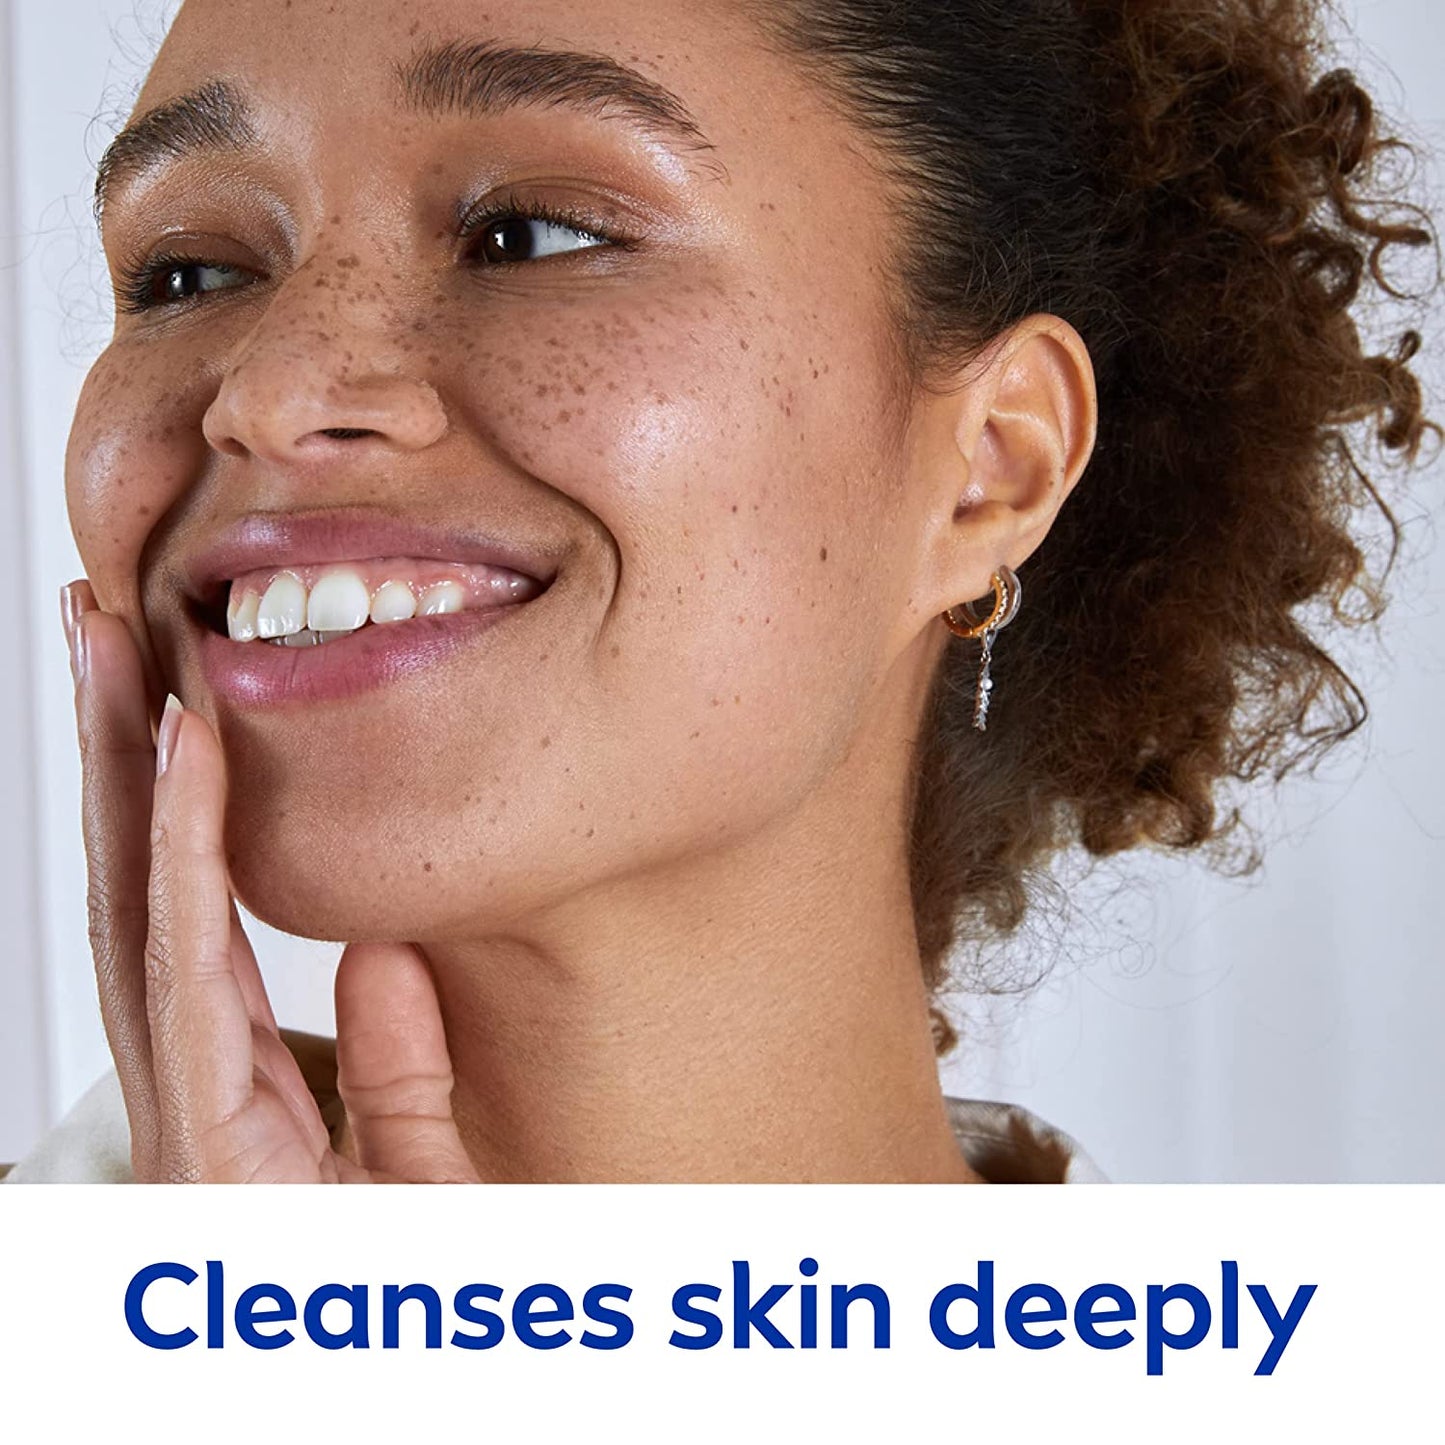 Cleanses skin deeply